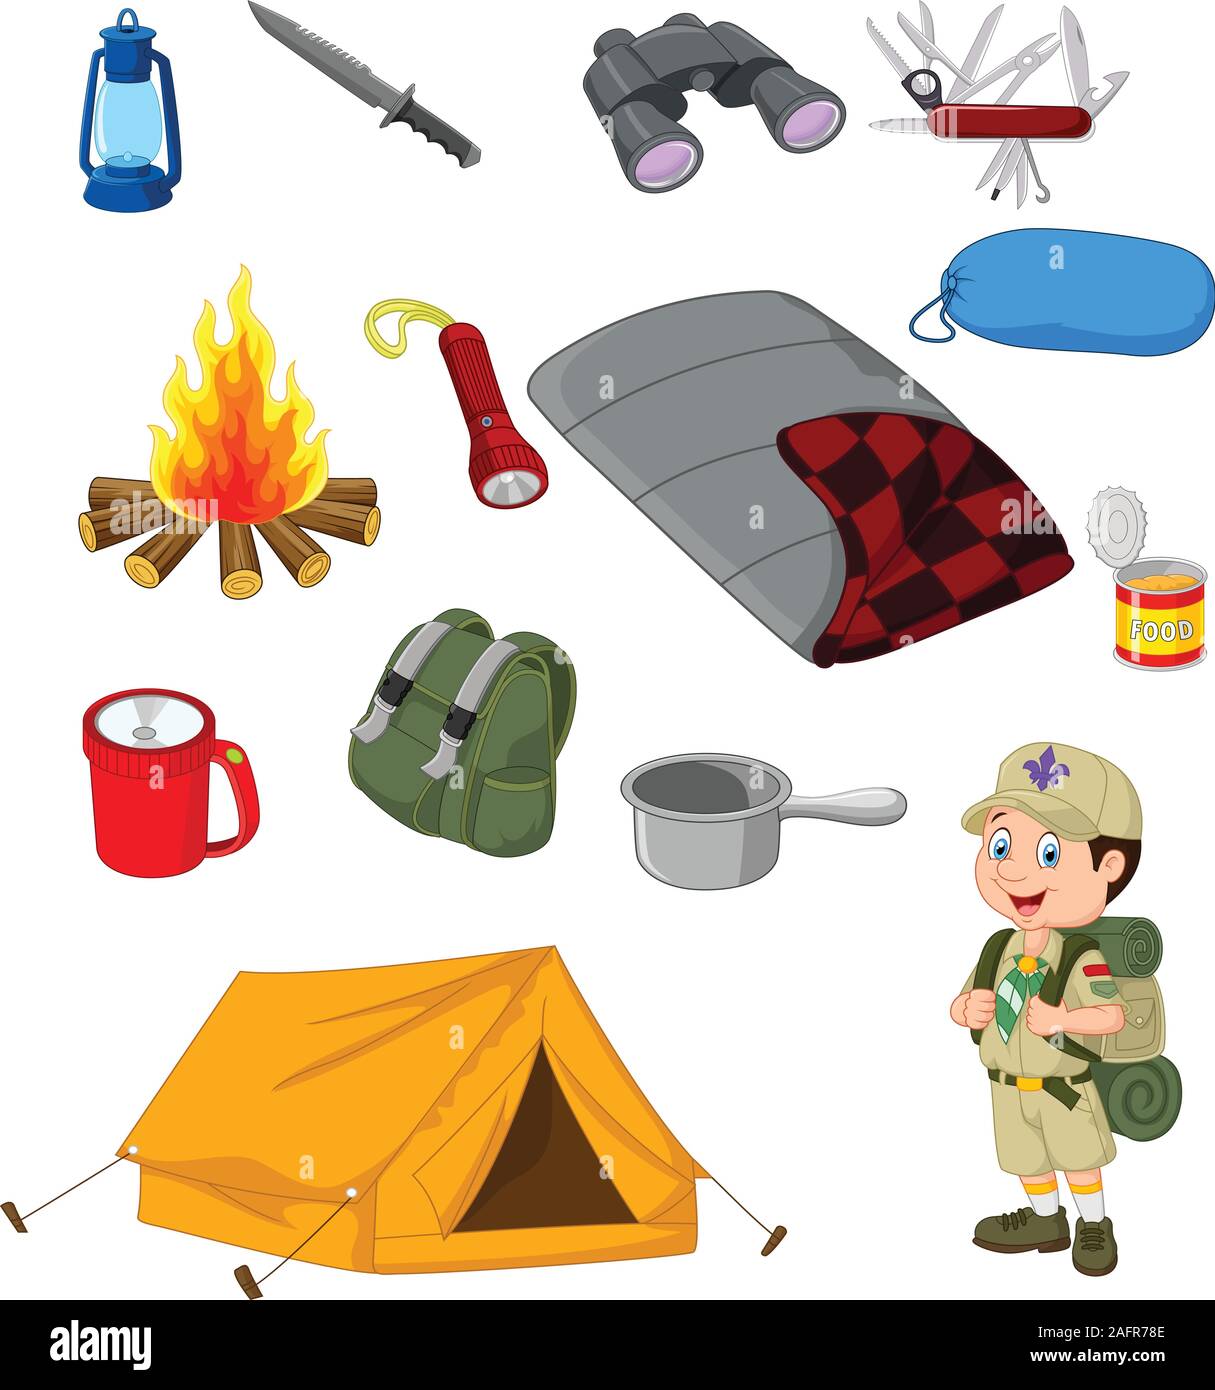 Hiking camping equipment base camp gear and outdoor accessories